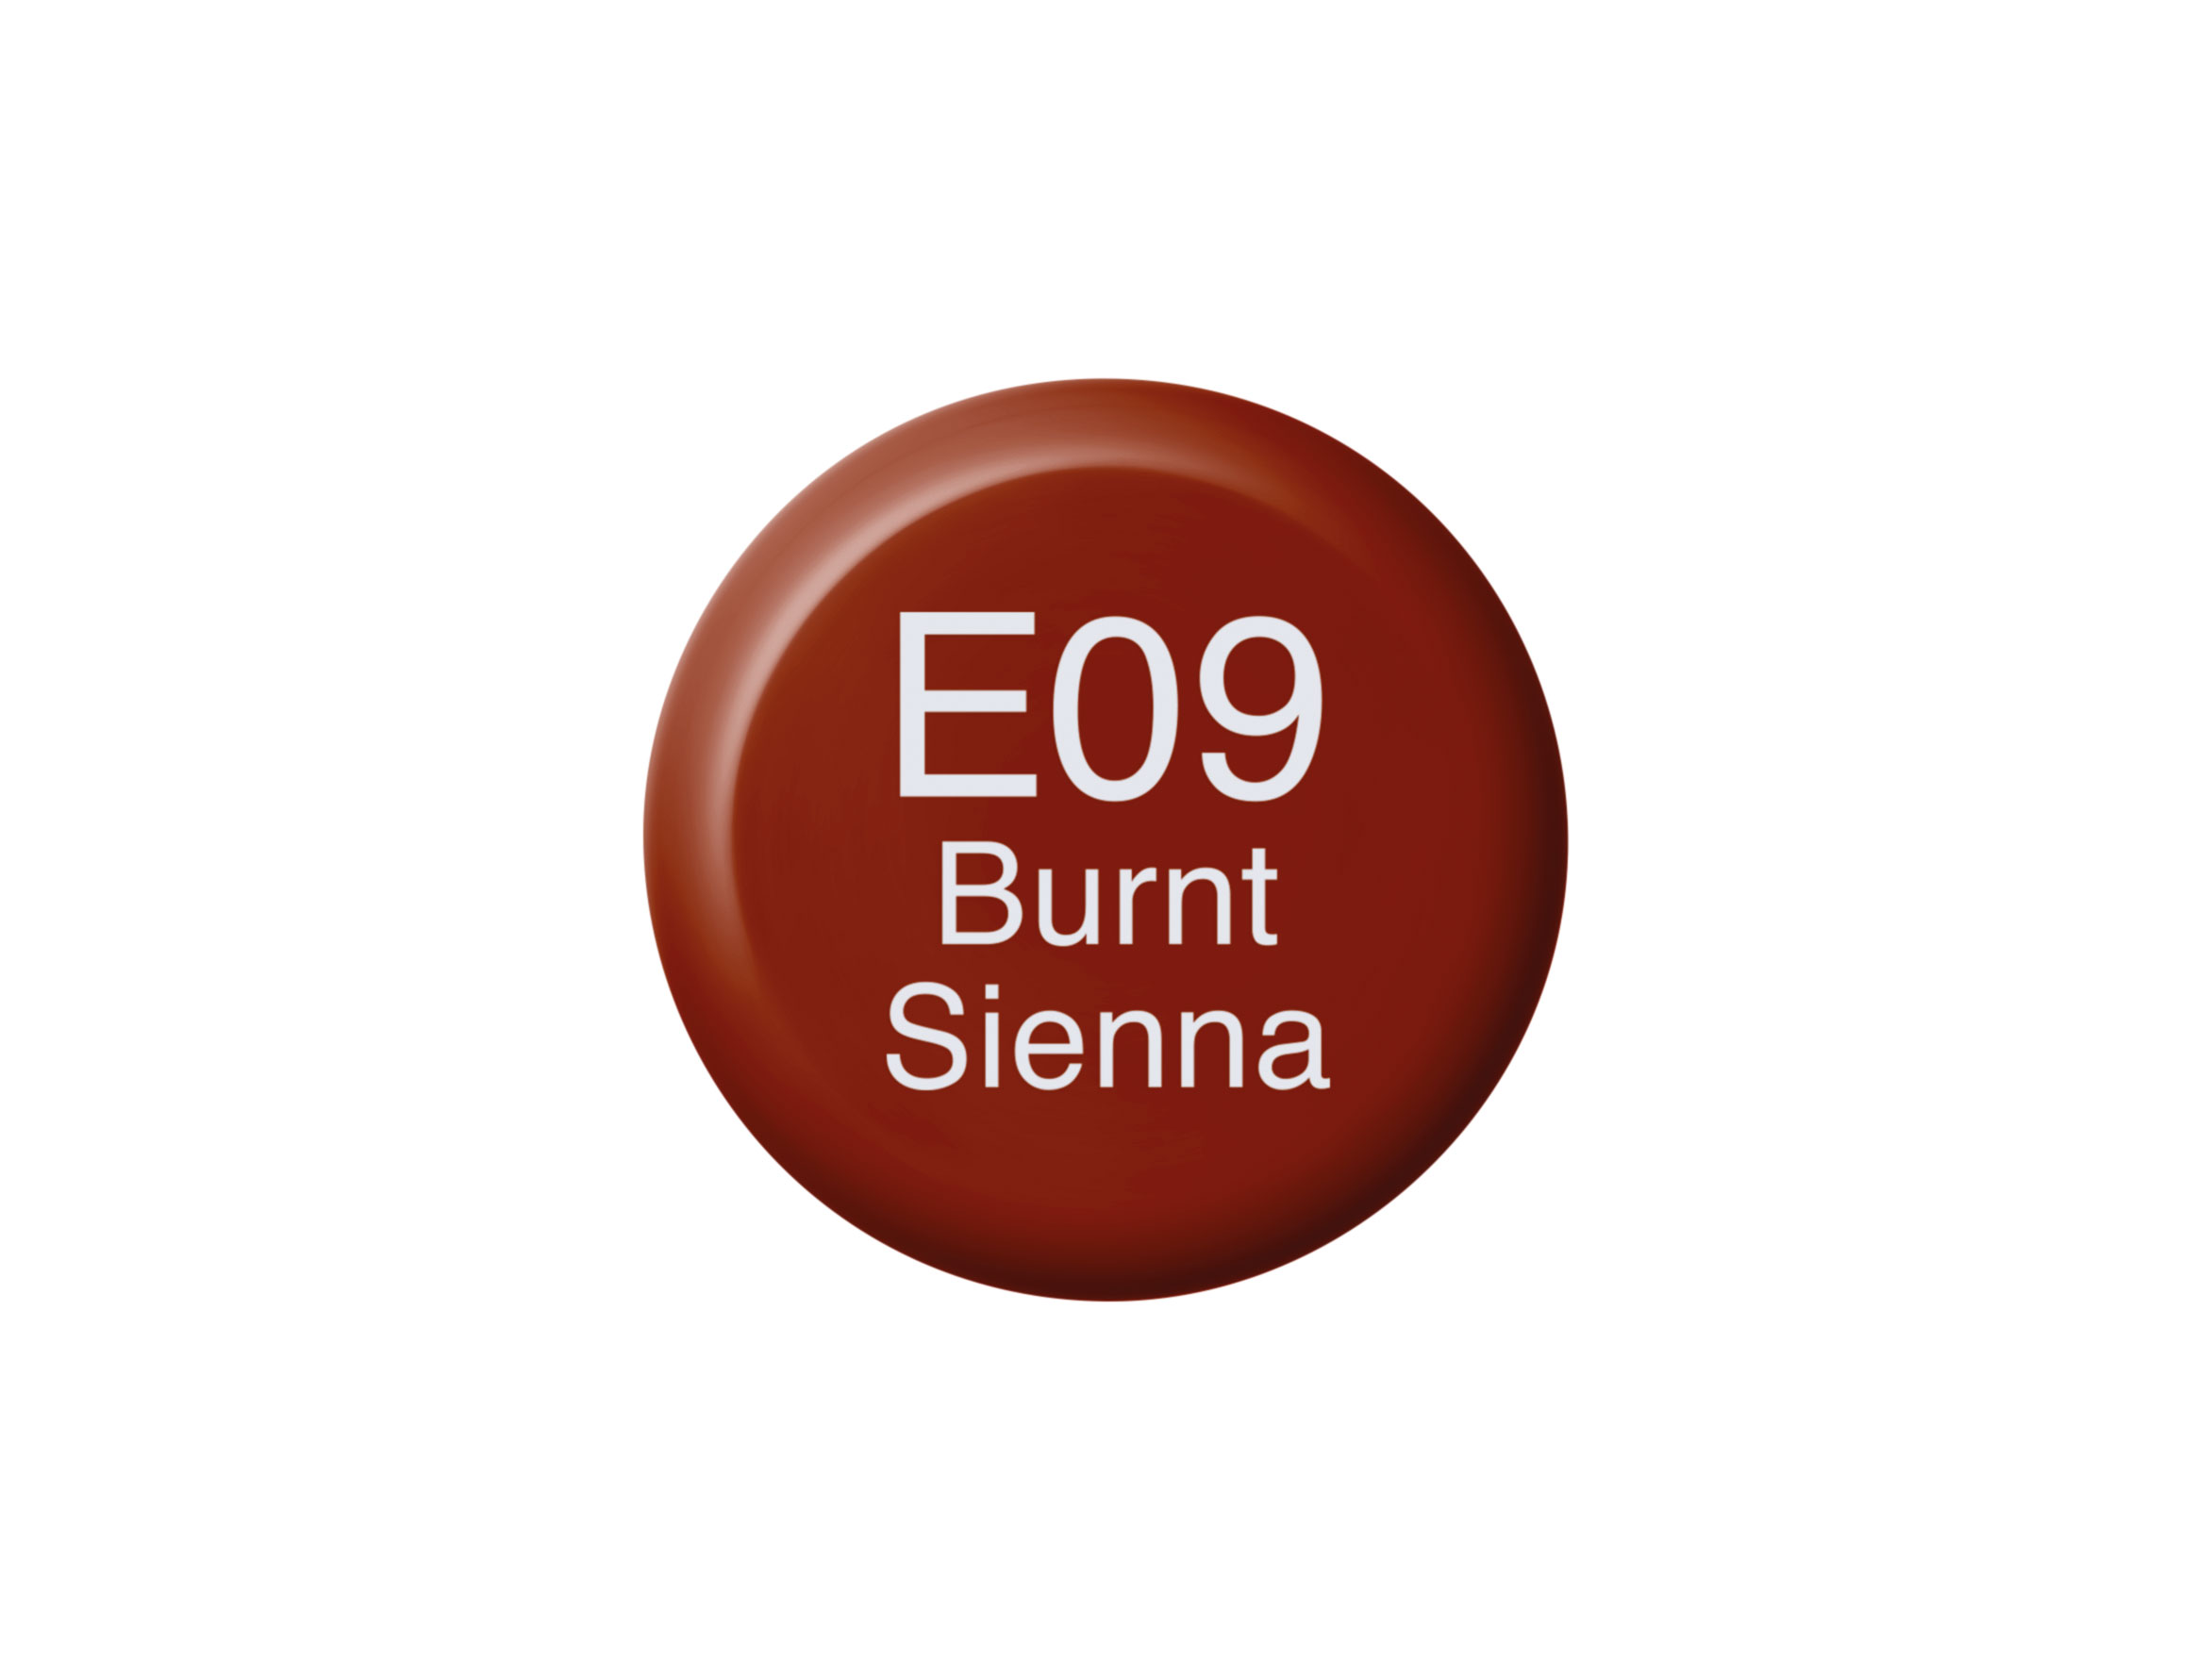 Copic Ink E09 Burnt Sienna